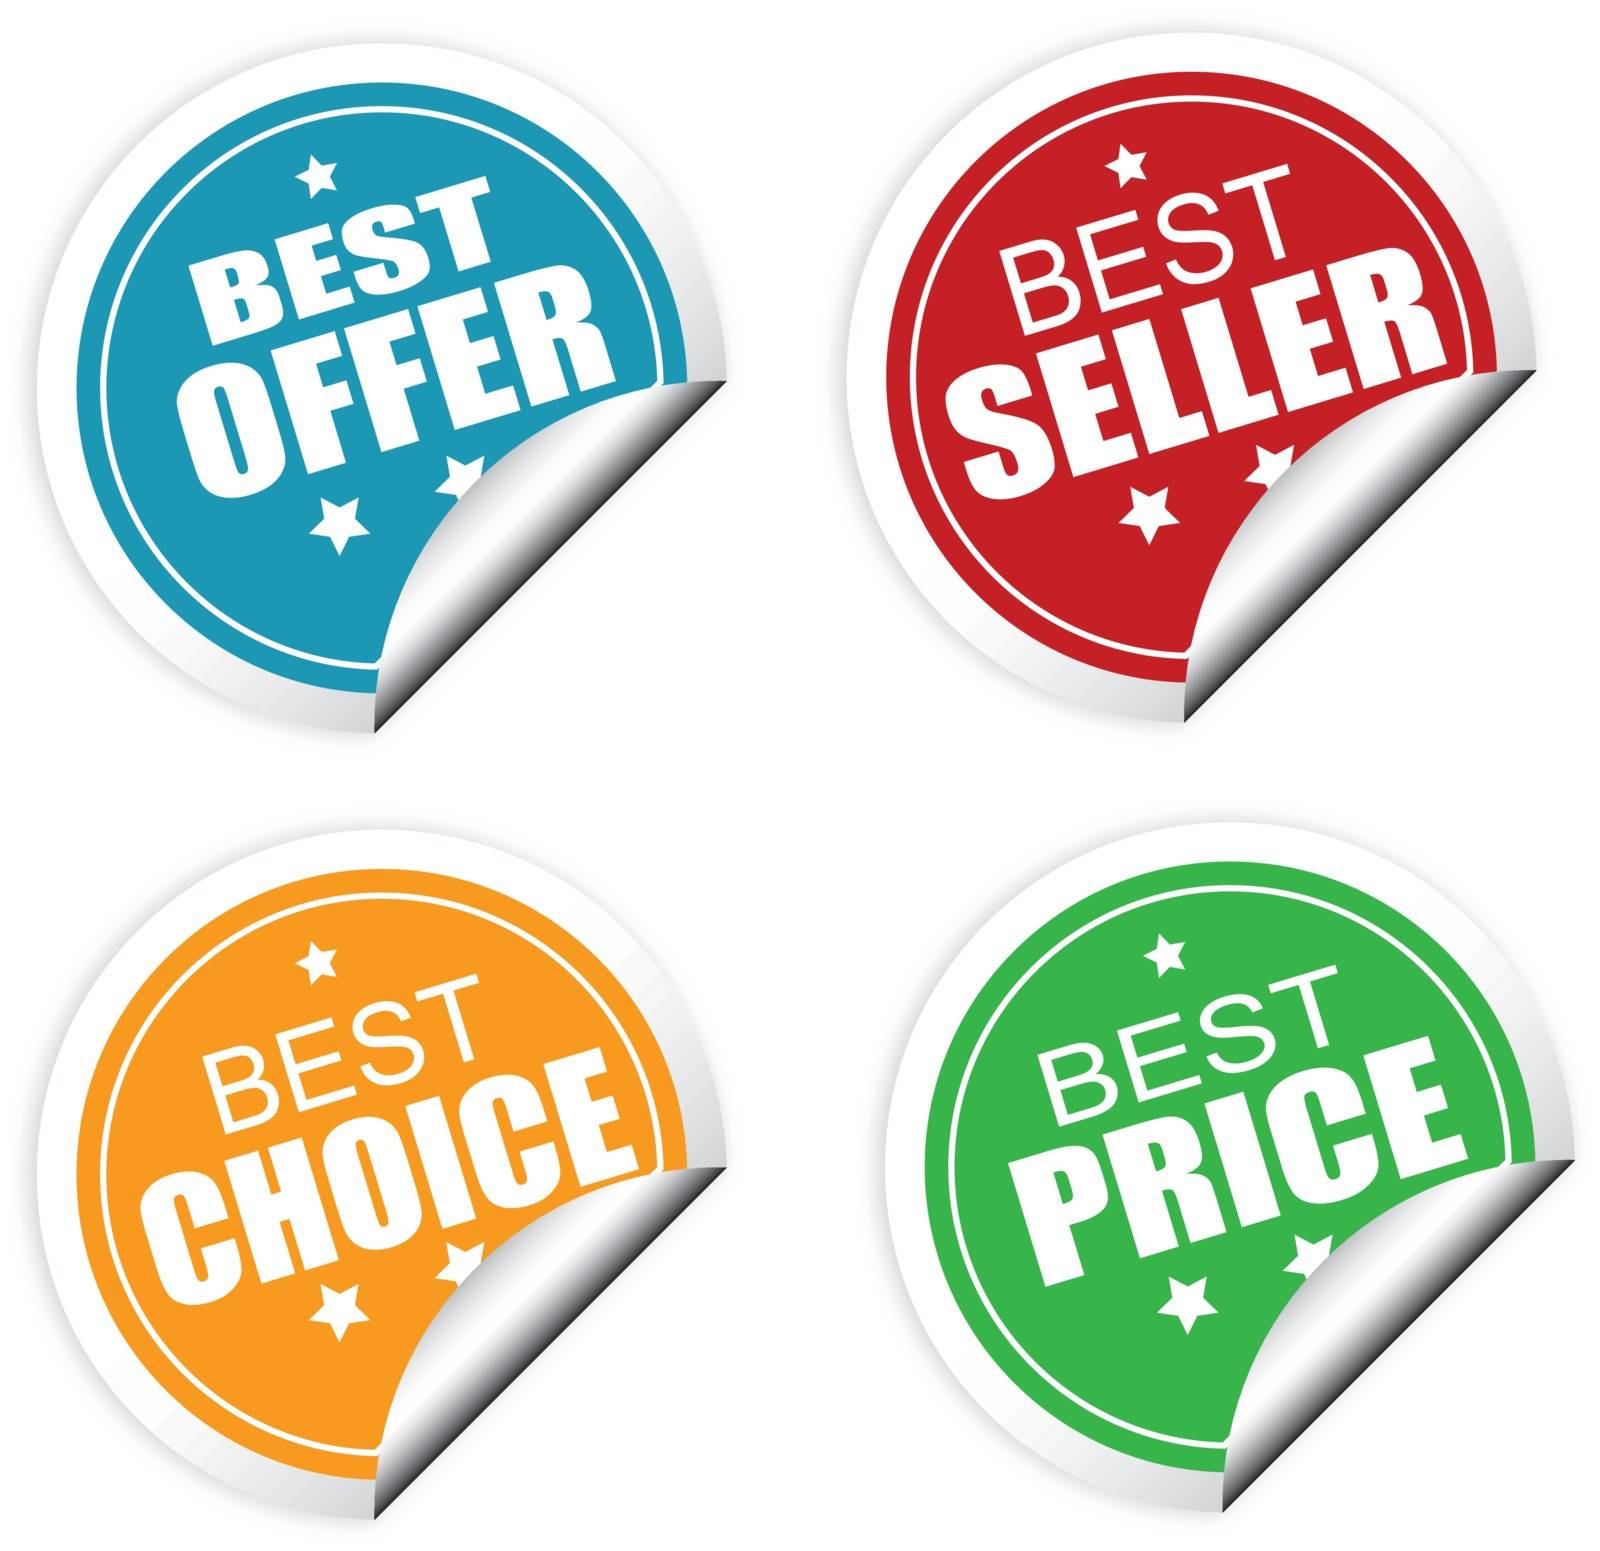 Best offer, best seller , best choice and best price colorful labels or stickers, vector illustration